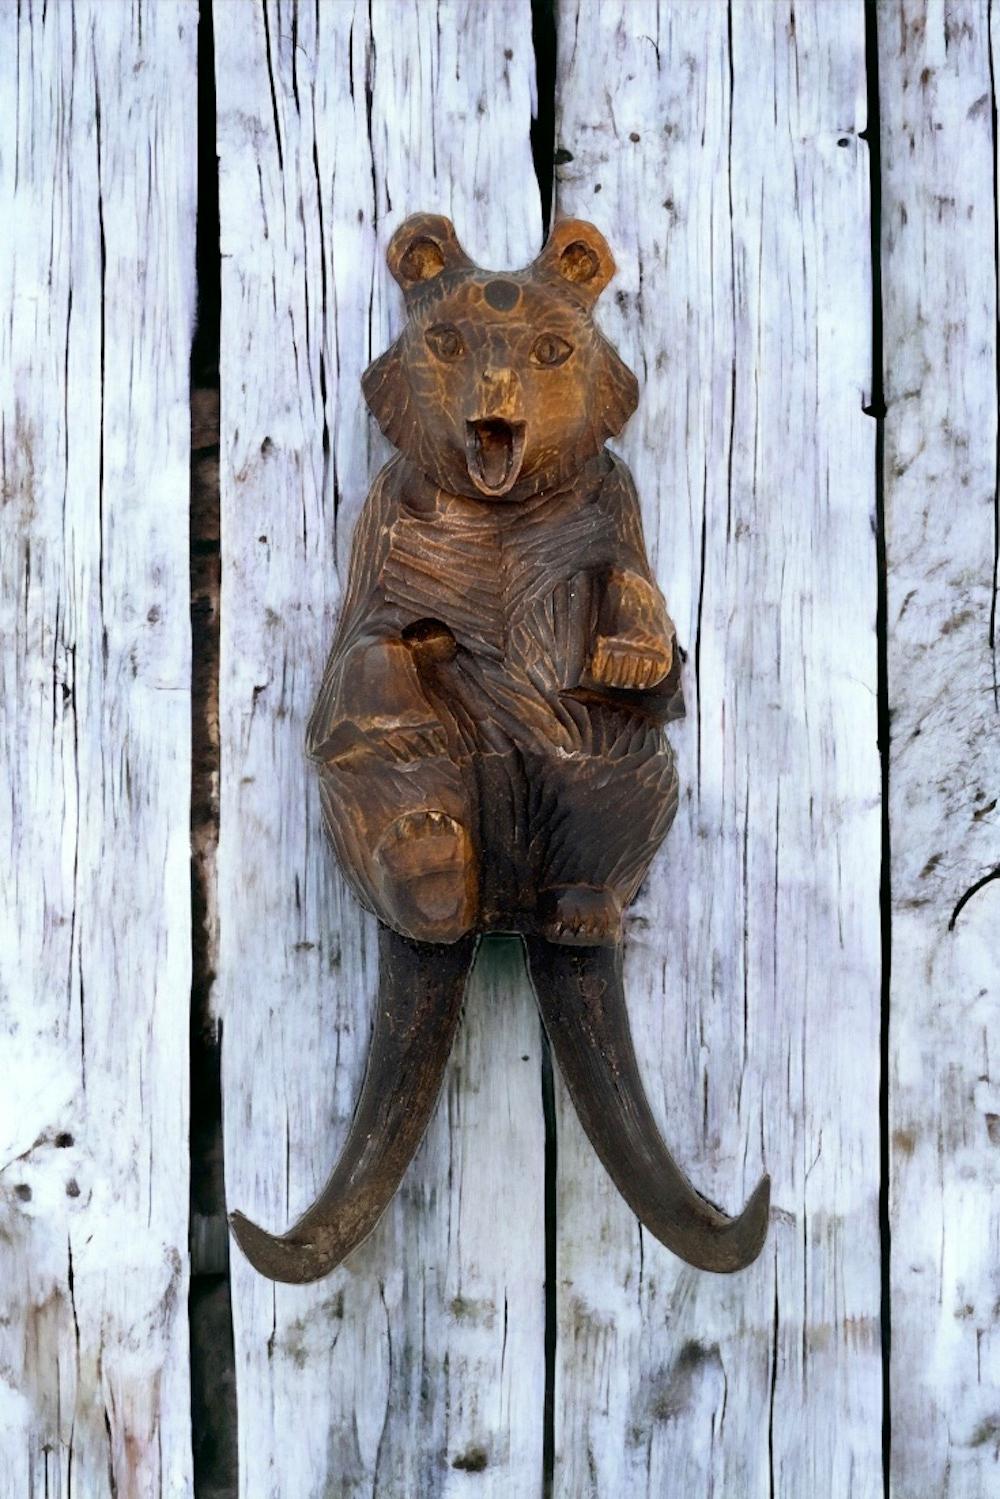 Classic 1890s black forest Brienz wood carved Bear as a Whip Holder or Wall Hook. Nice addition to your room or just for use it on your wall. Made of hand carved wood. Found at an estate sale in Vienna, Austria. Love this Black Forest Bear, very